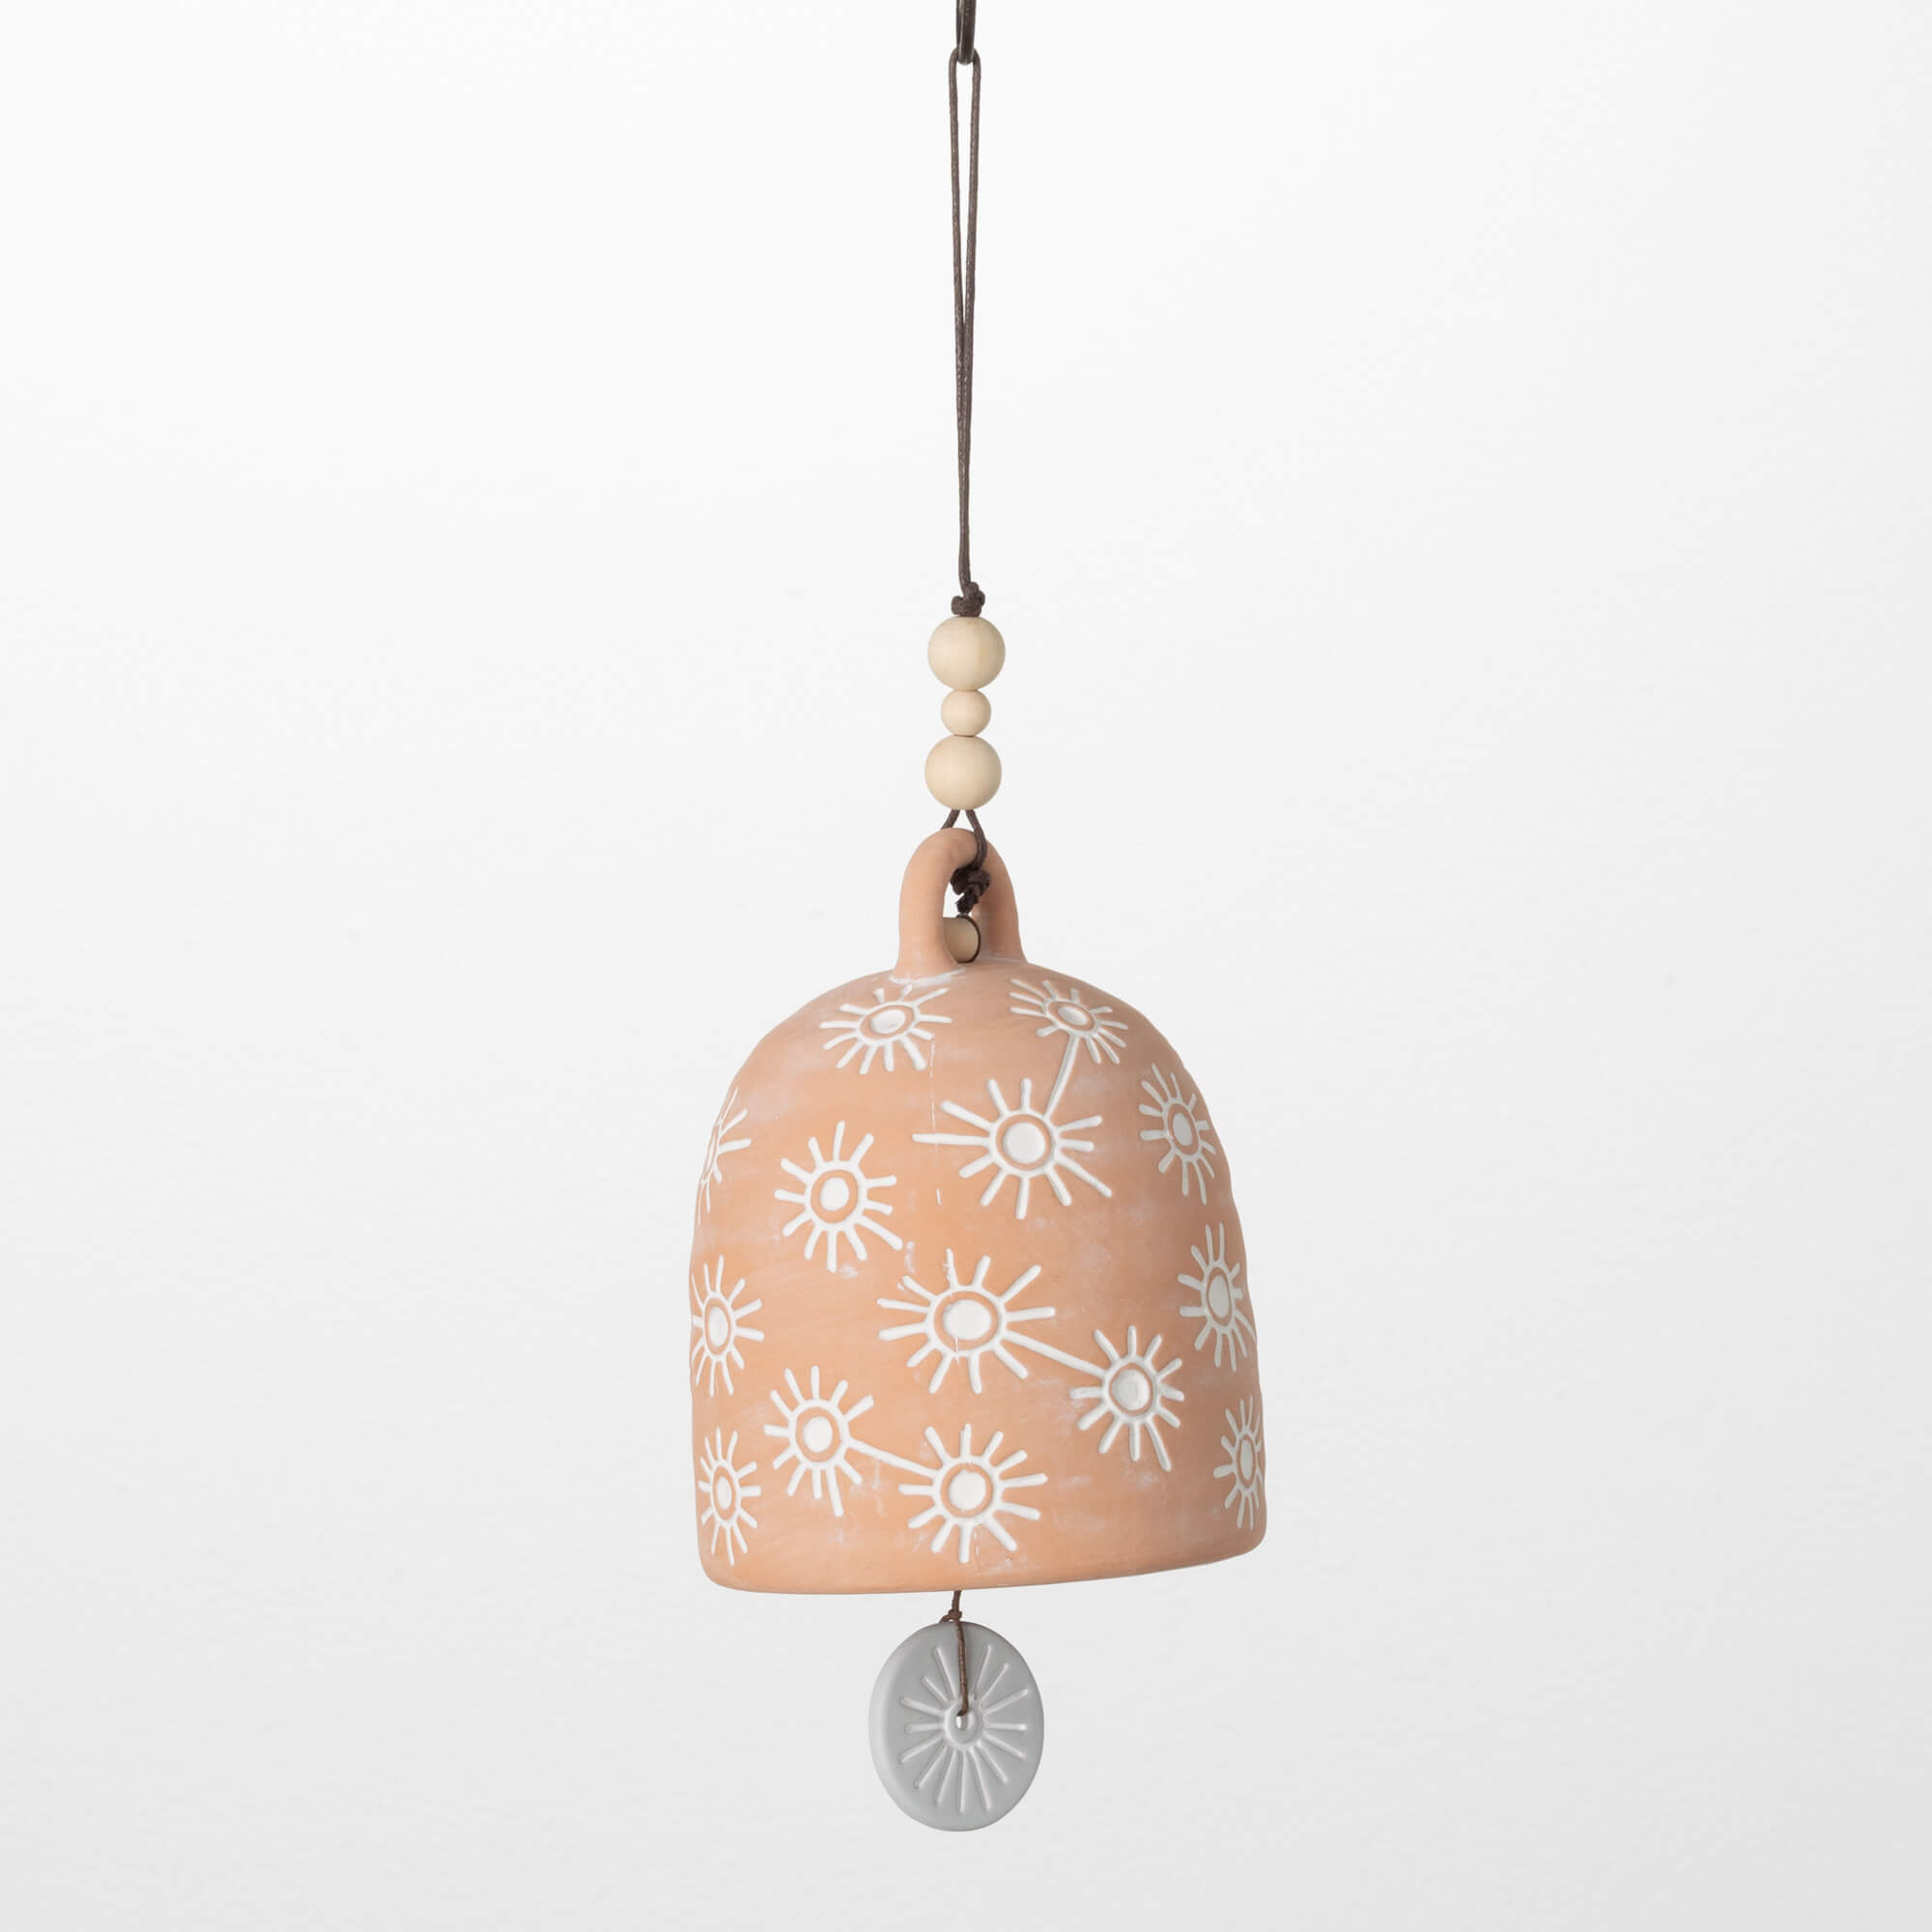 HANGING BELL CHIME